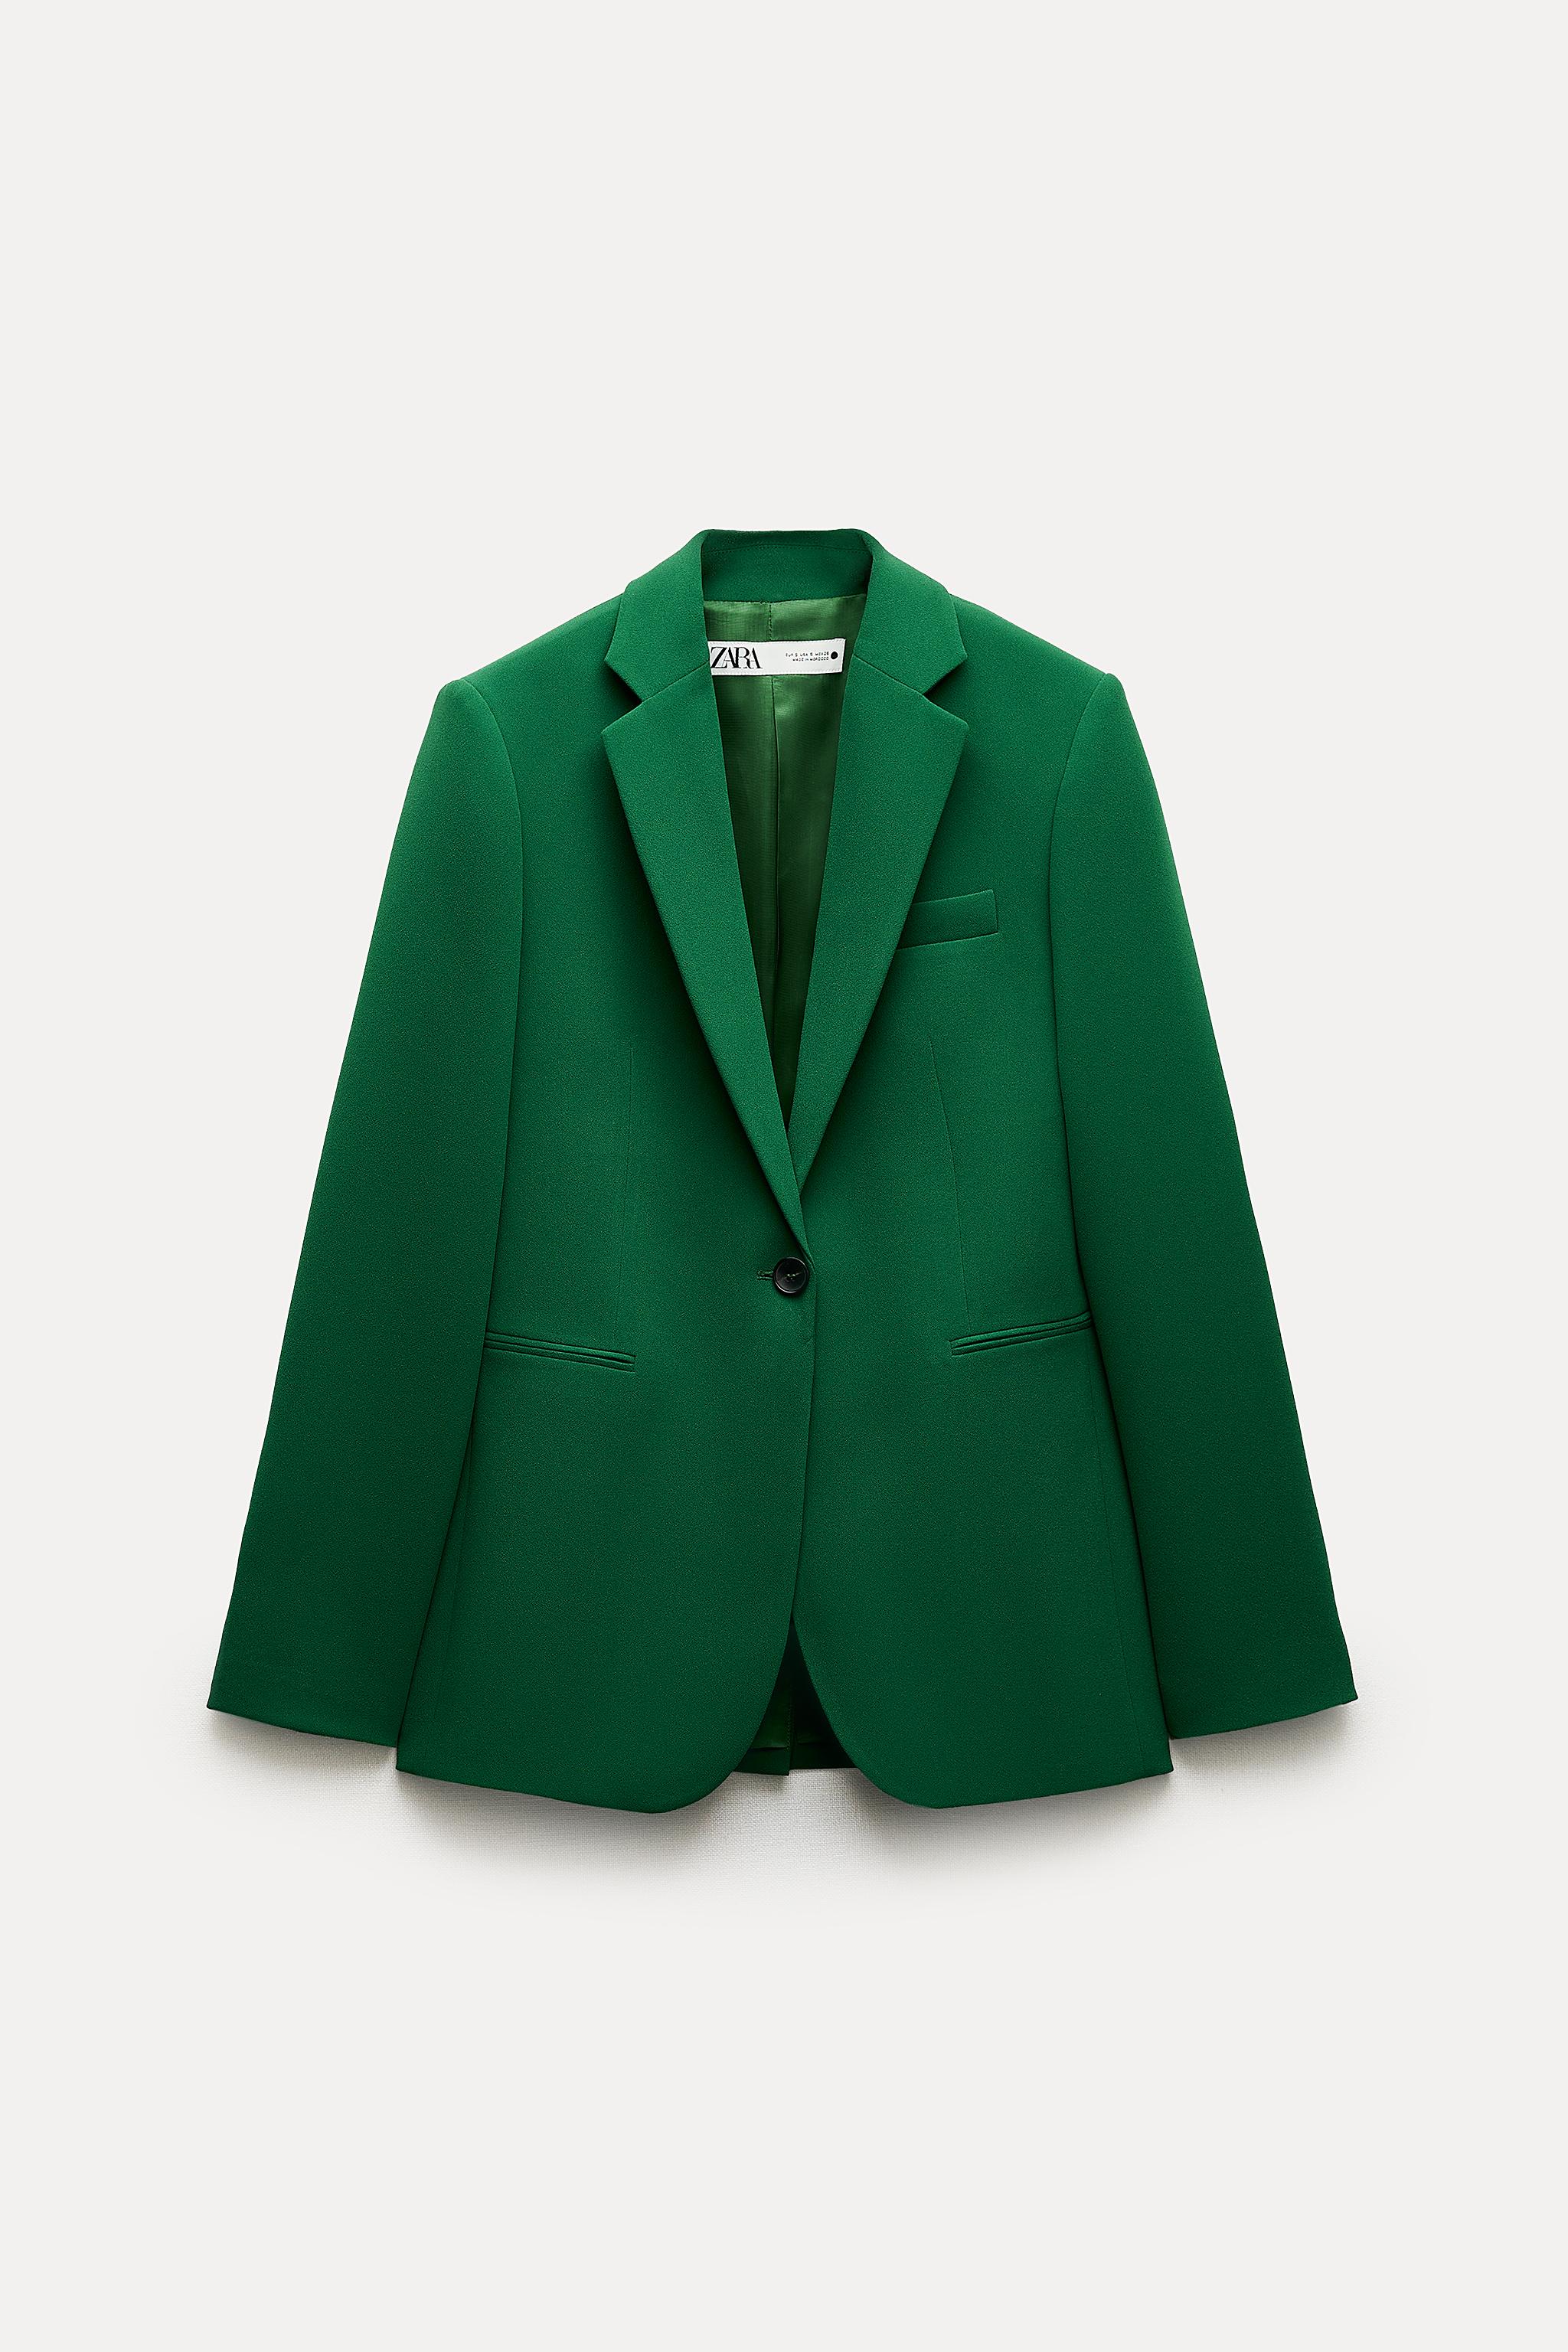 ZW COLLECTION TAILORED BUTTONED JACKET - Green | ZARA United States